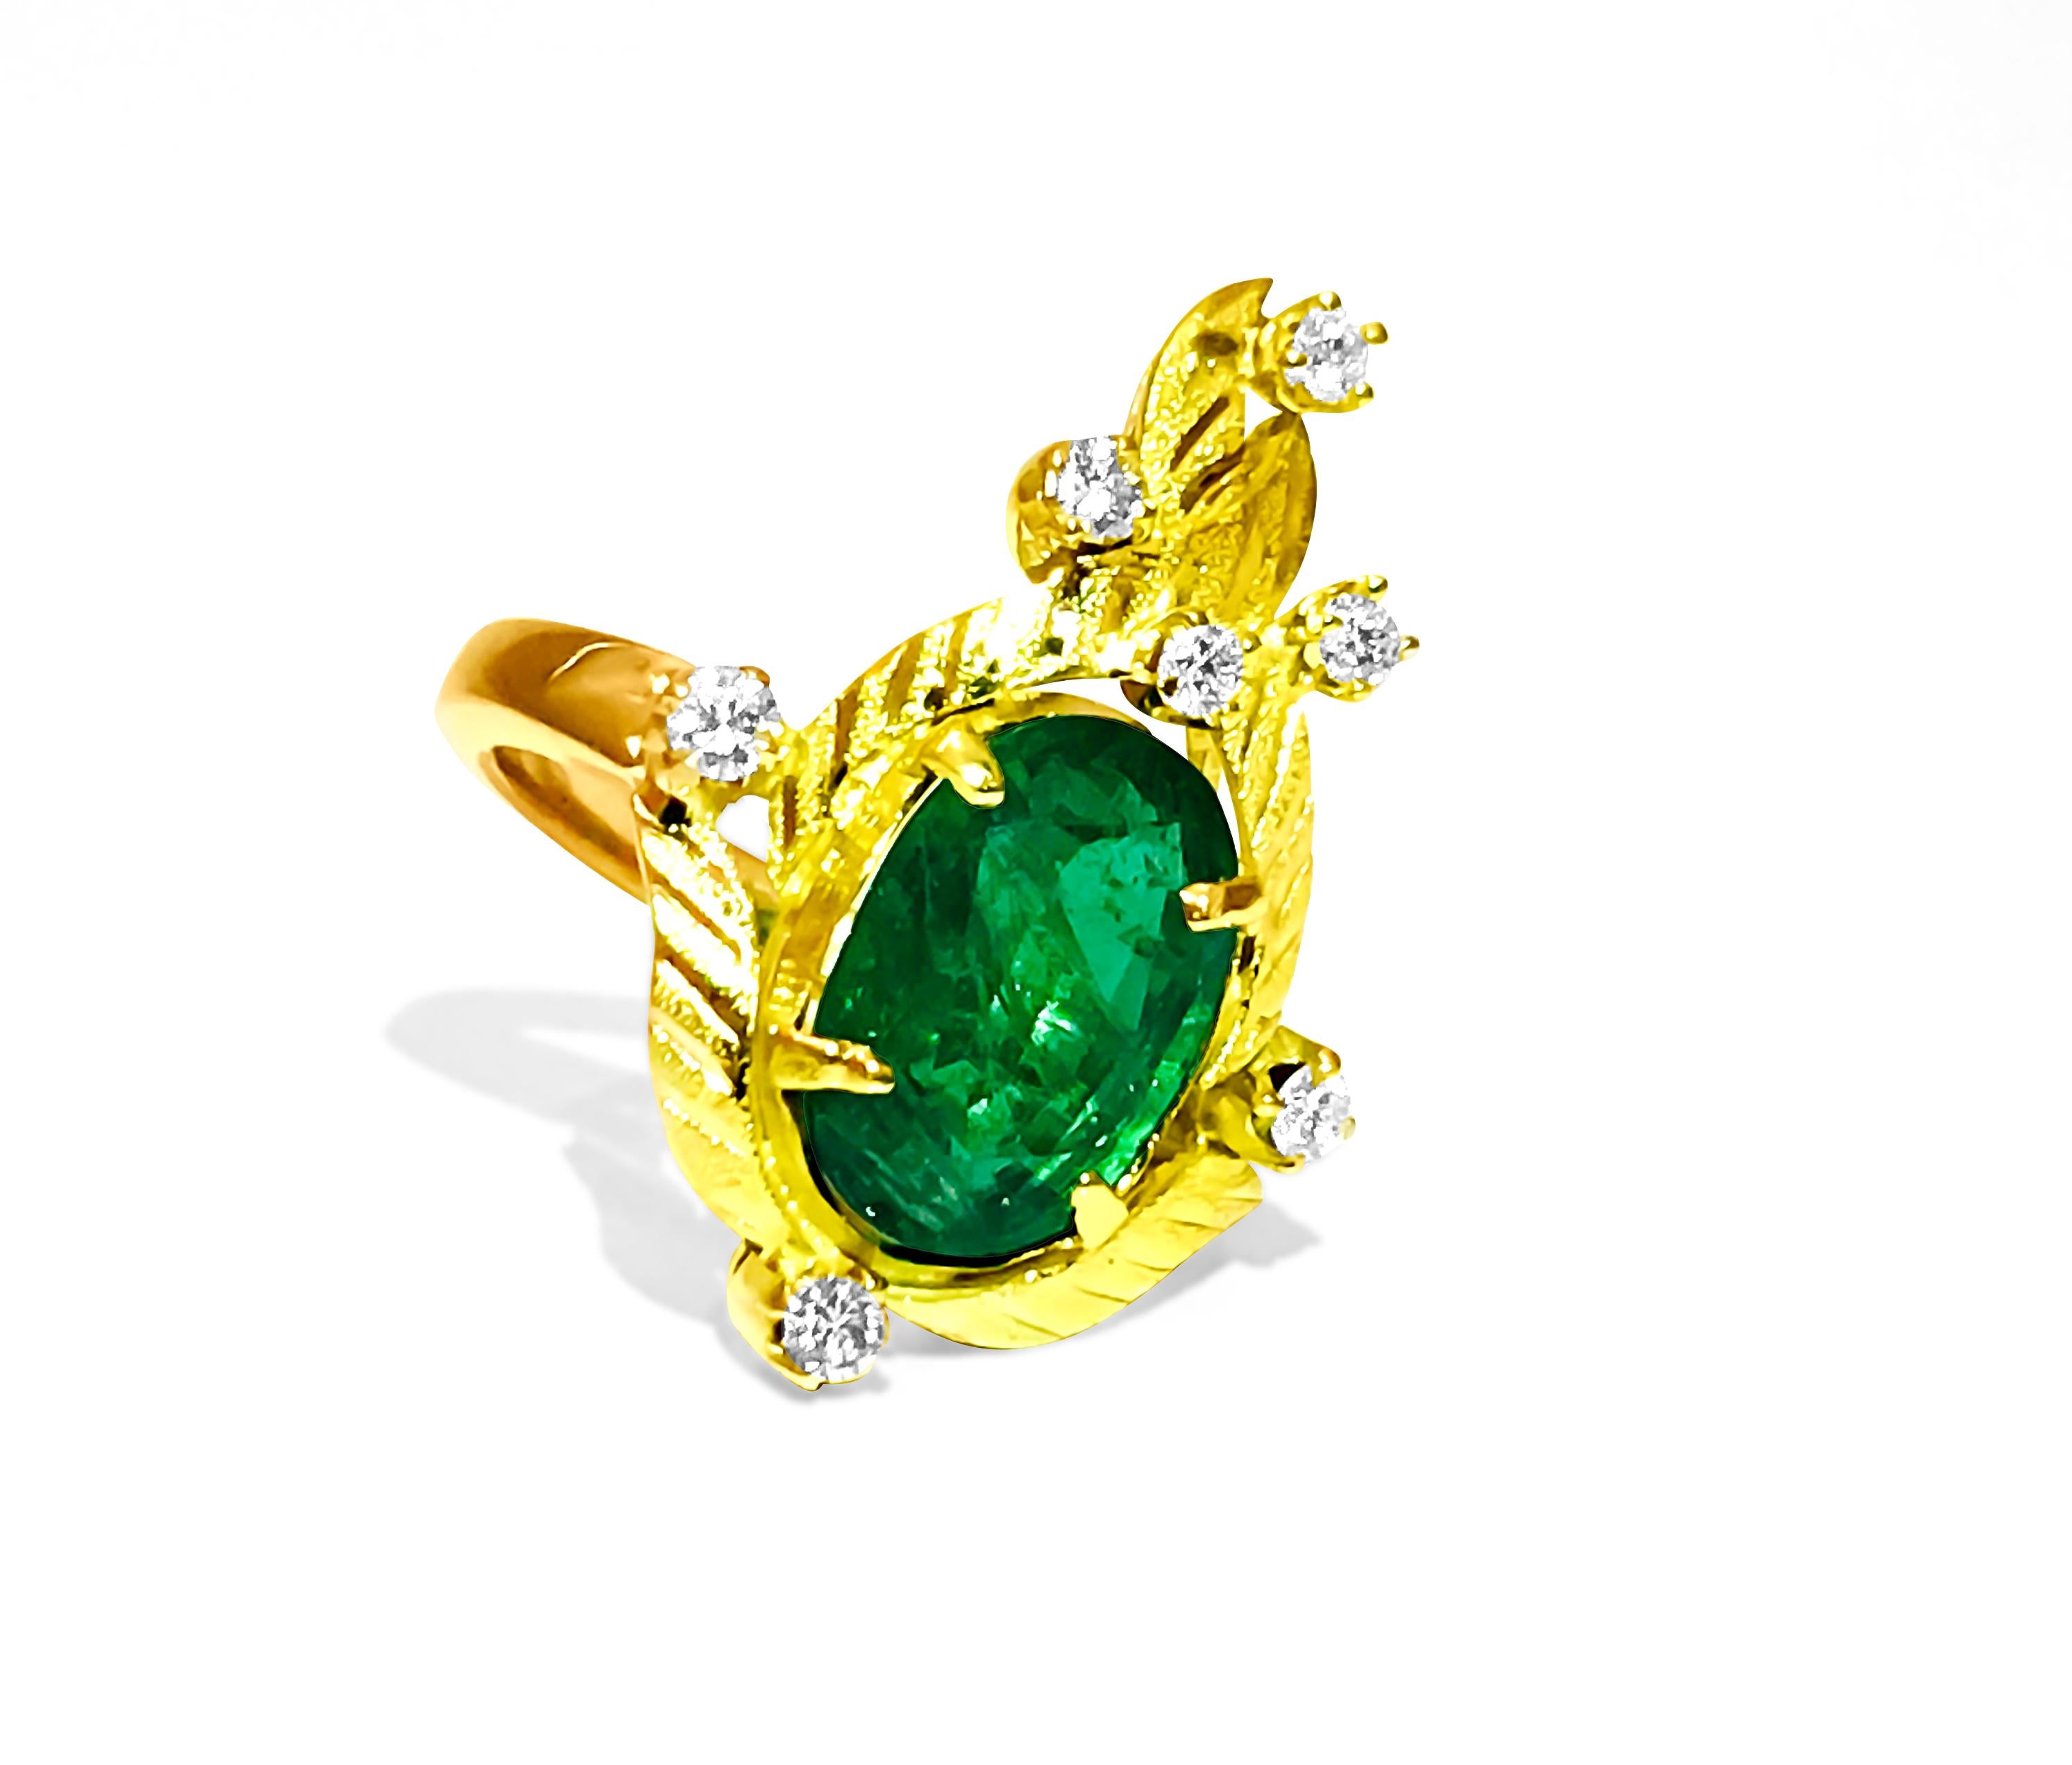 Metal: 18K yellow gold. 
Center: 2.89 carat emerald. Oval cut, Colombian emerald. 100% natural earth mined.
0.35 carat diamonds. Round brilliant cut. G color - VS clarity. 100% natural earth mined. 
Ring size: US 7. Ring resizing available
Womens